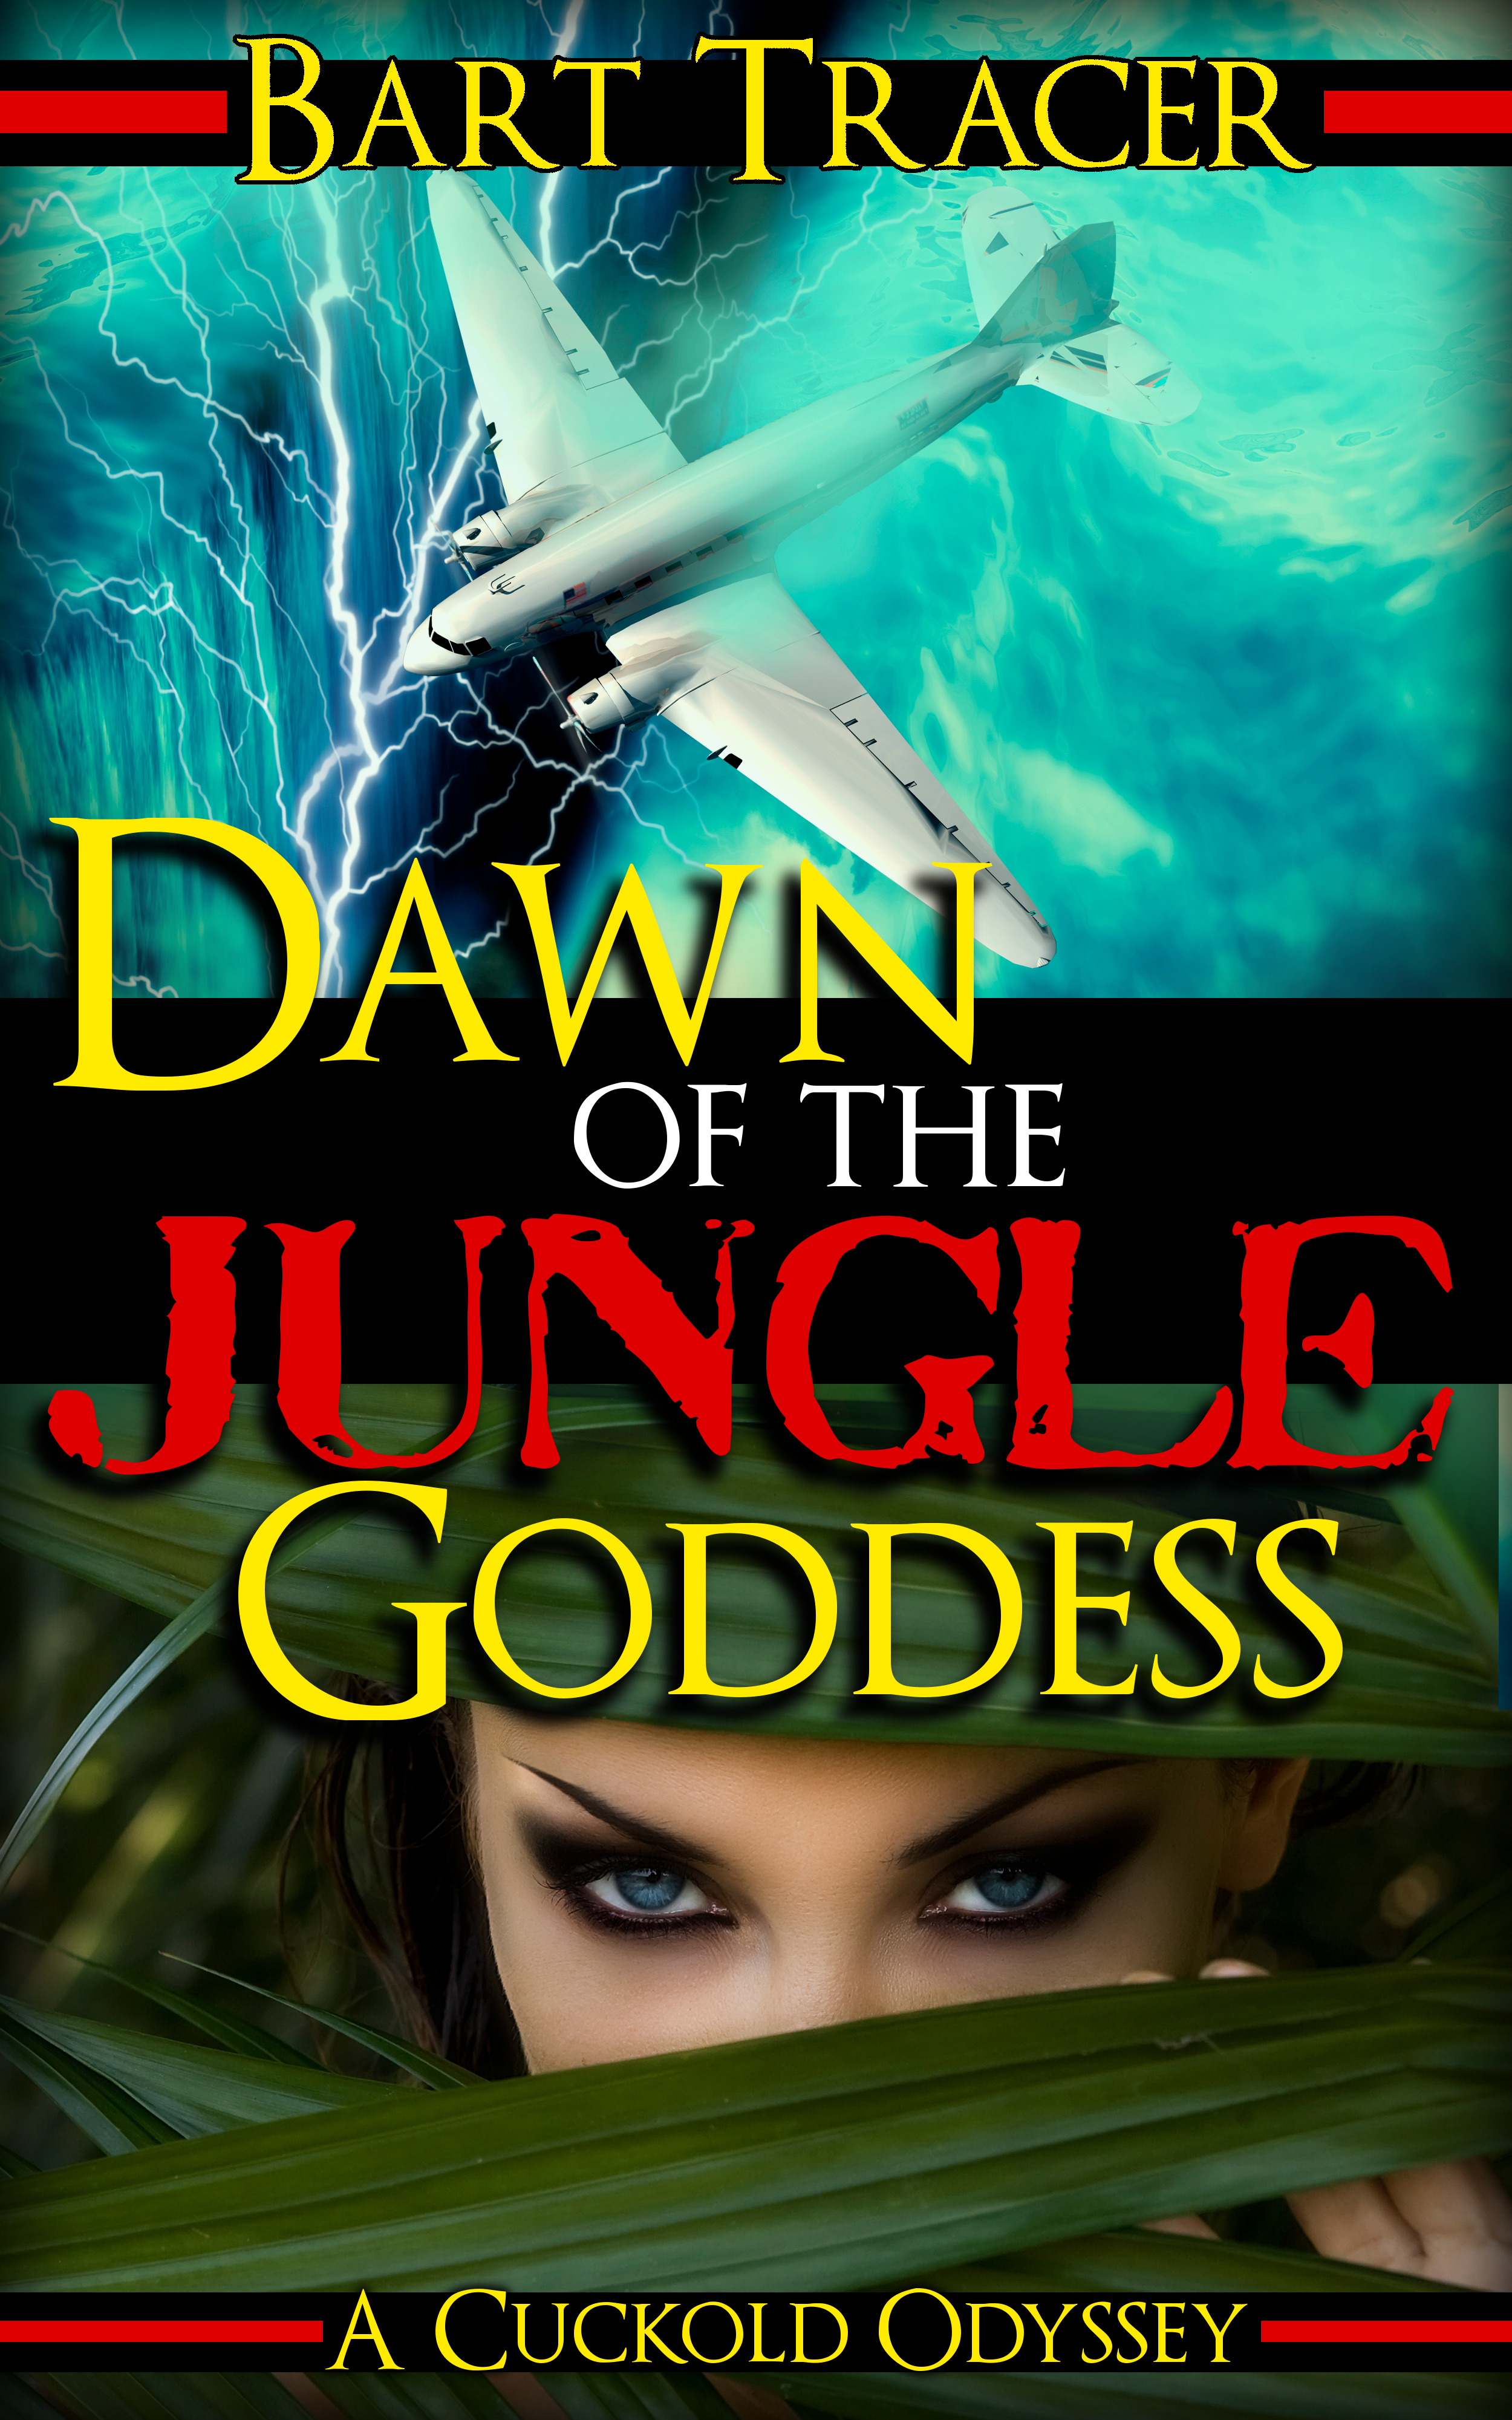 FREE: Dawn of the Jungle Goddess: A Cuckold Odyssey by Bart Tracer